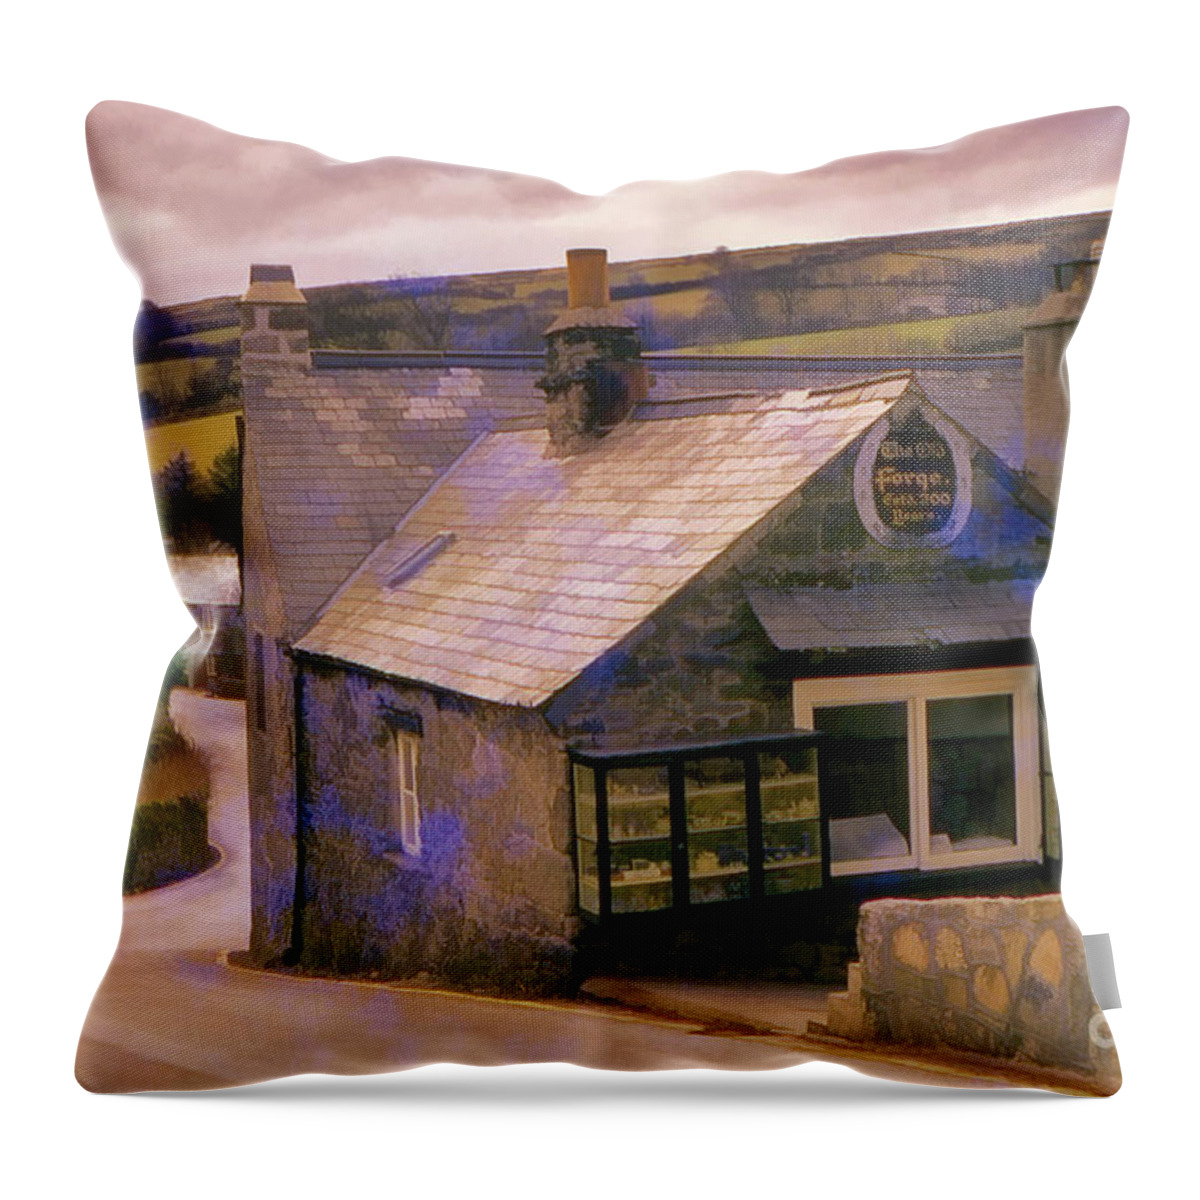 England Throw Pillow featuring the digital art An English Village scene by Frank Lee